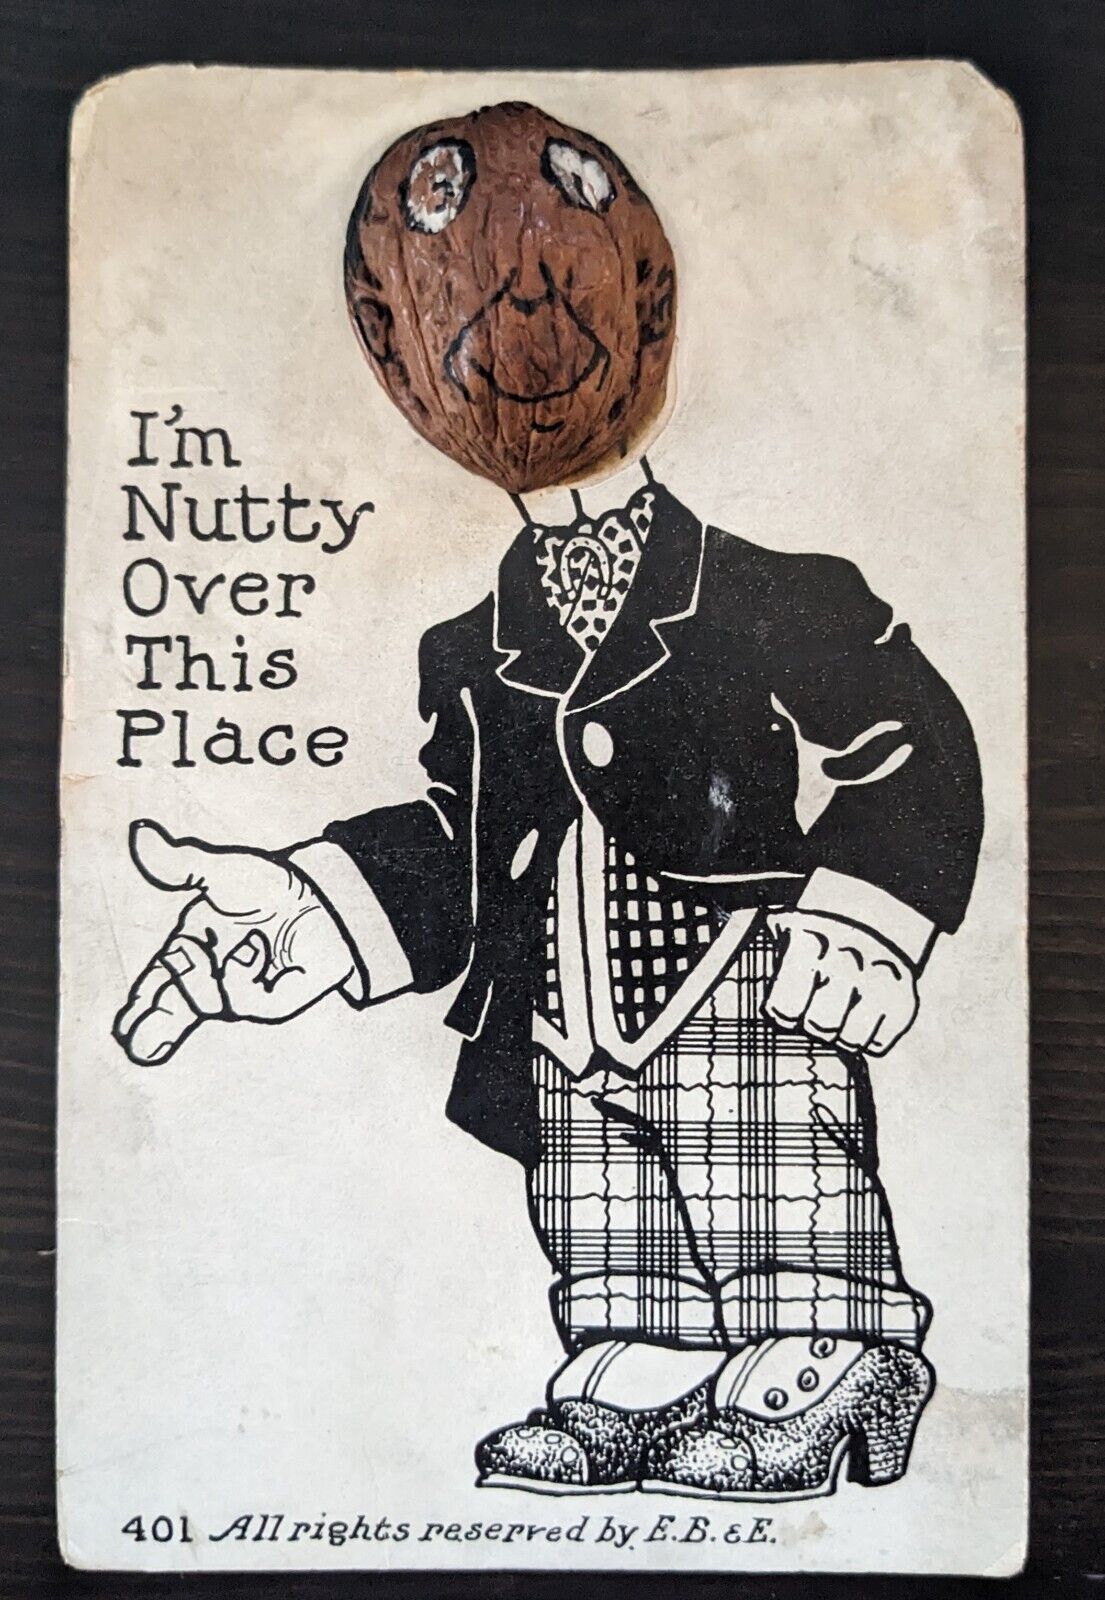 Real Walnut Shell Attached as Man's Head to Nutty Vintage Novelty Postcard